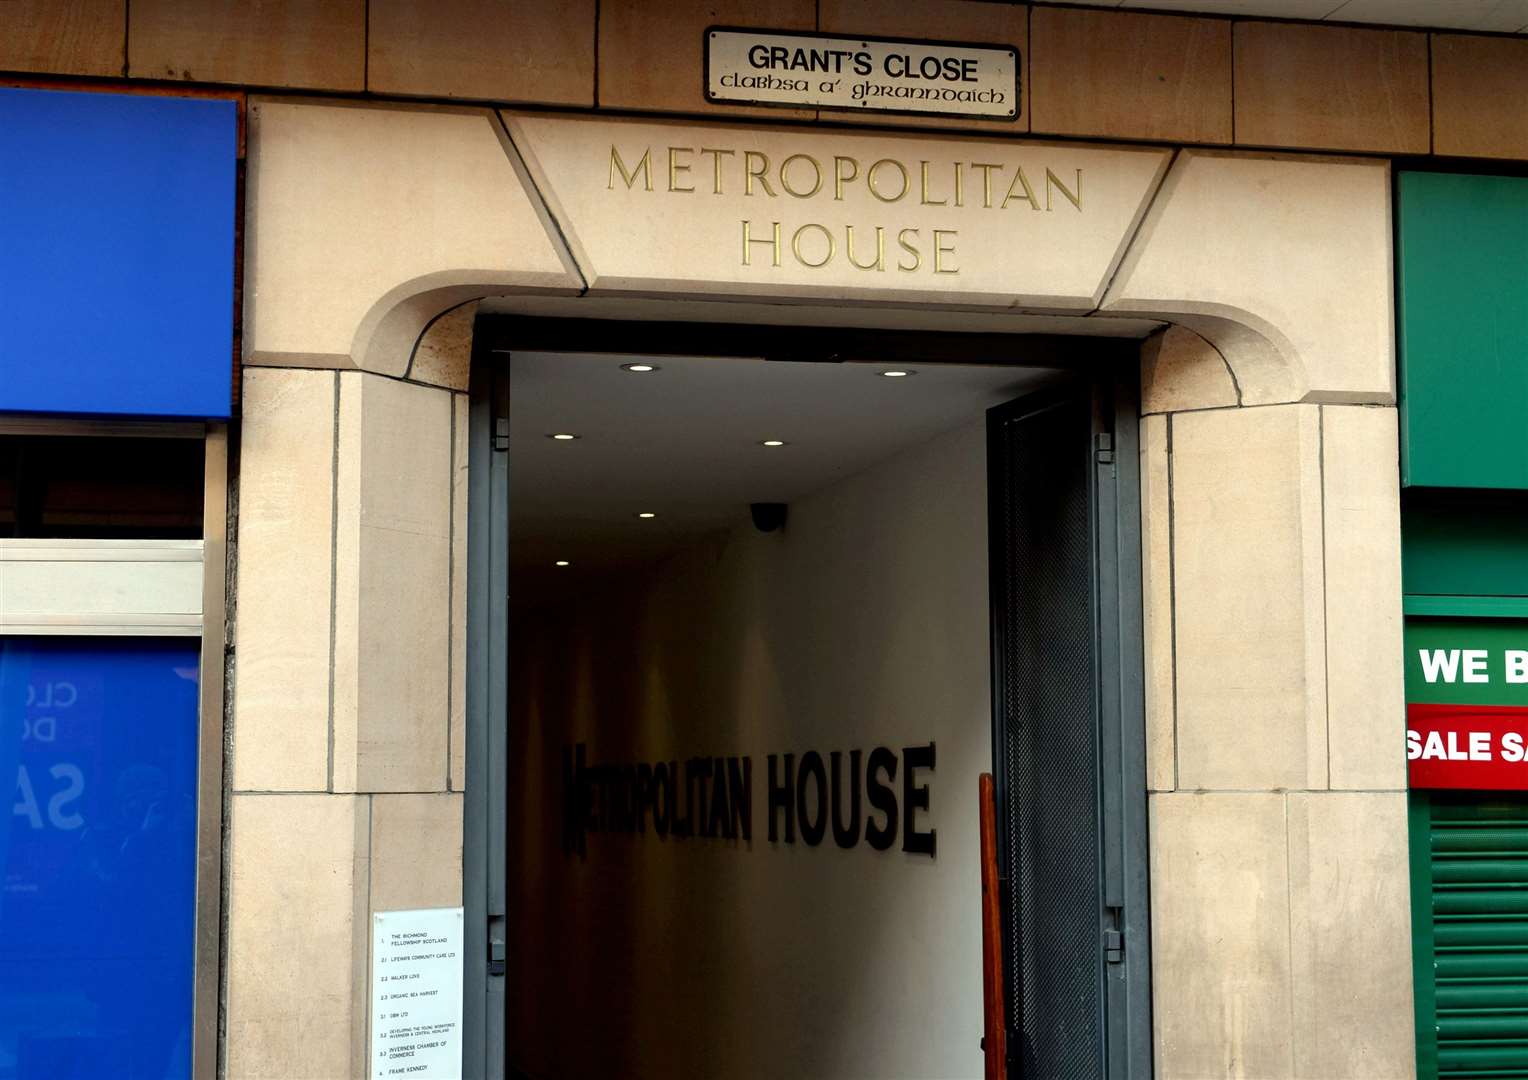 Metropolitan House, Inverness where the Richmond Fellowship is based.